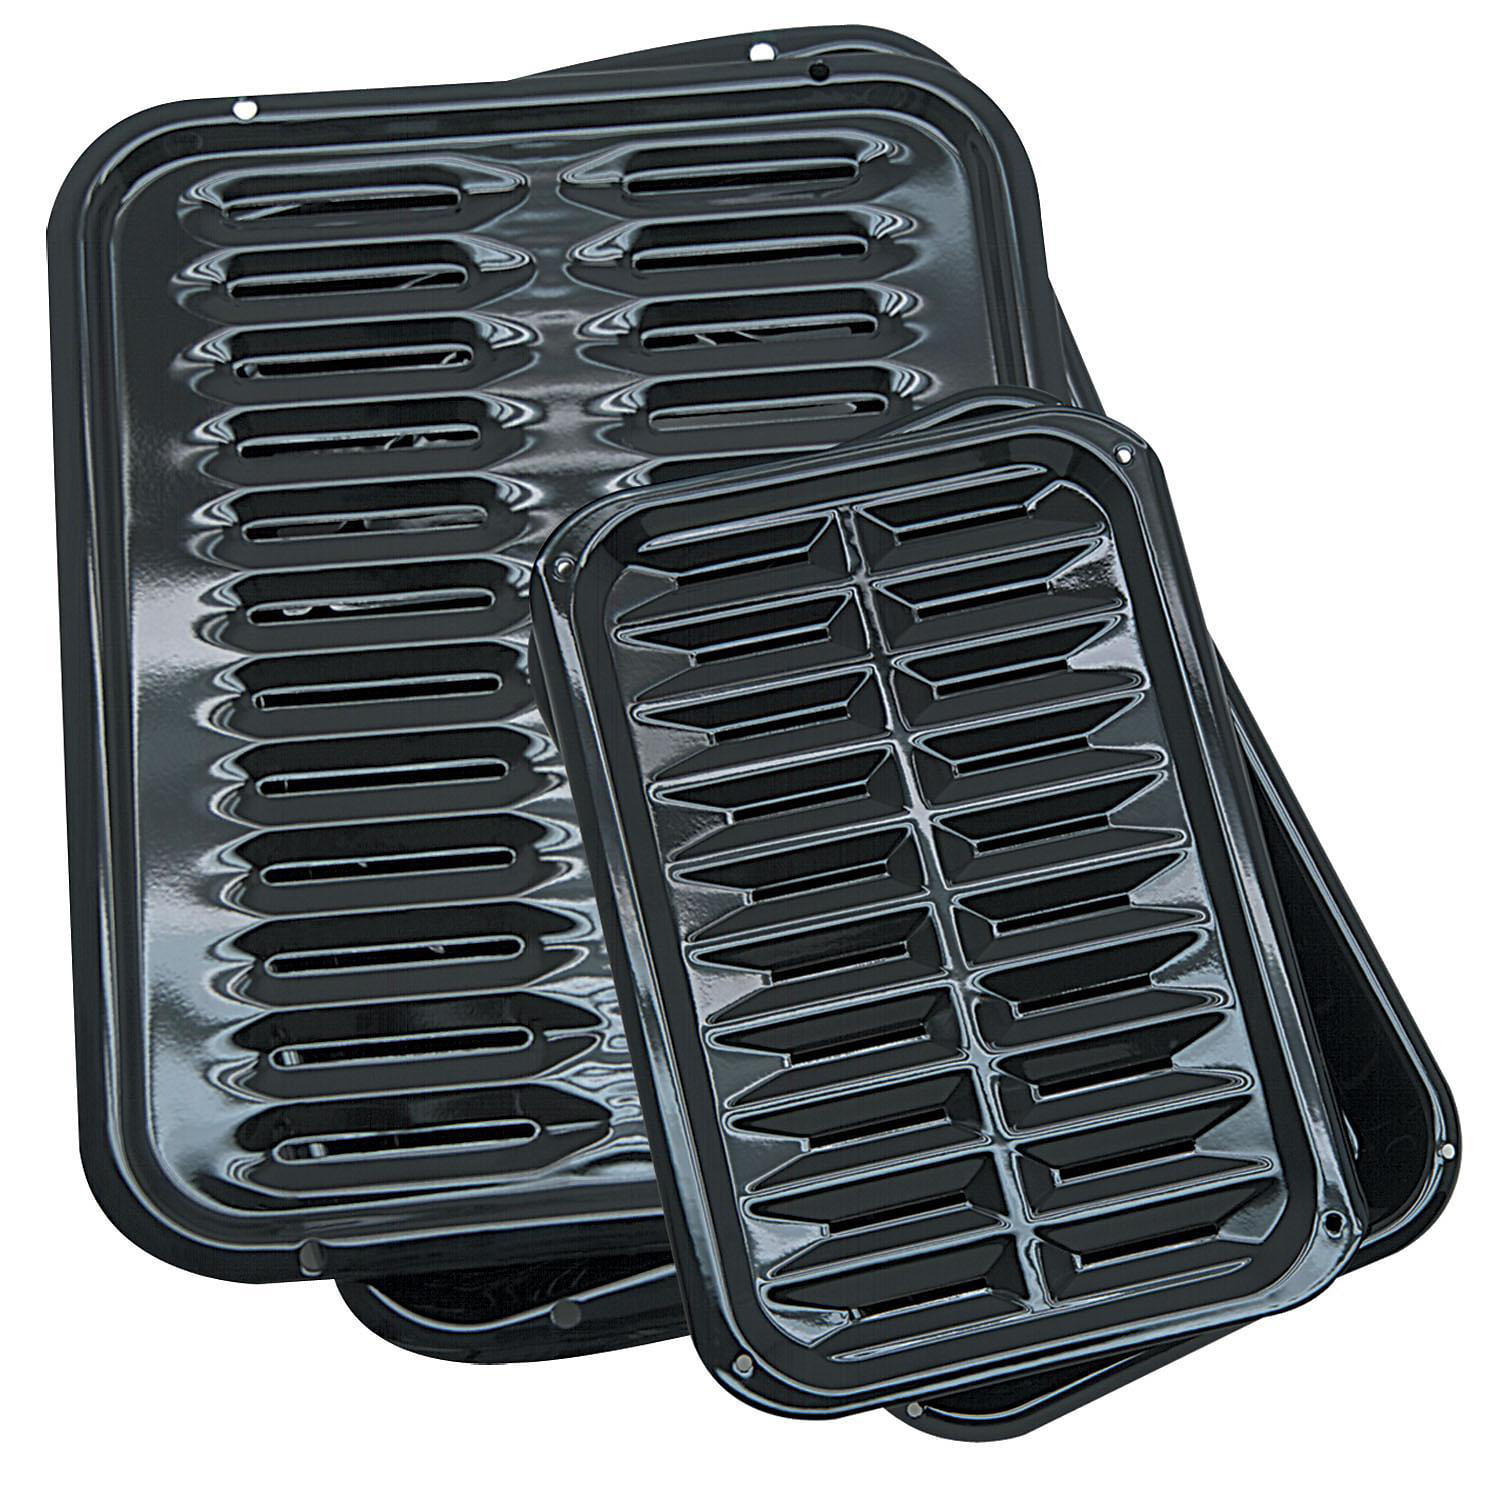 Black Kitchen Basics 101 Replacement for Whirlpool 4396923 Porcelain Broiler Pan and Grill